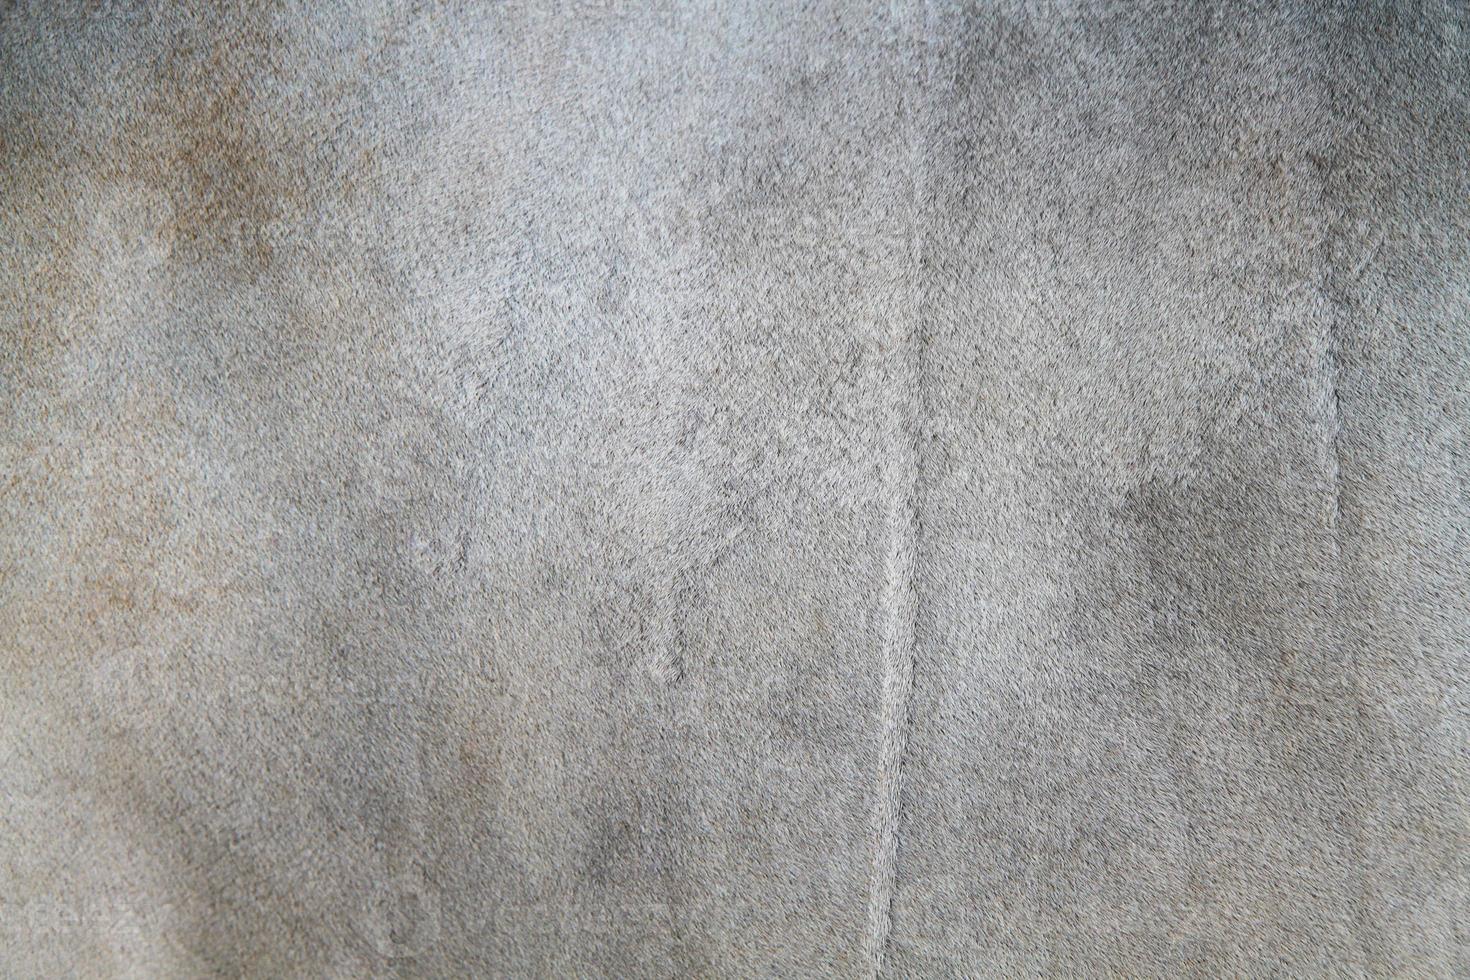 Cow skin texture or background photo